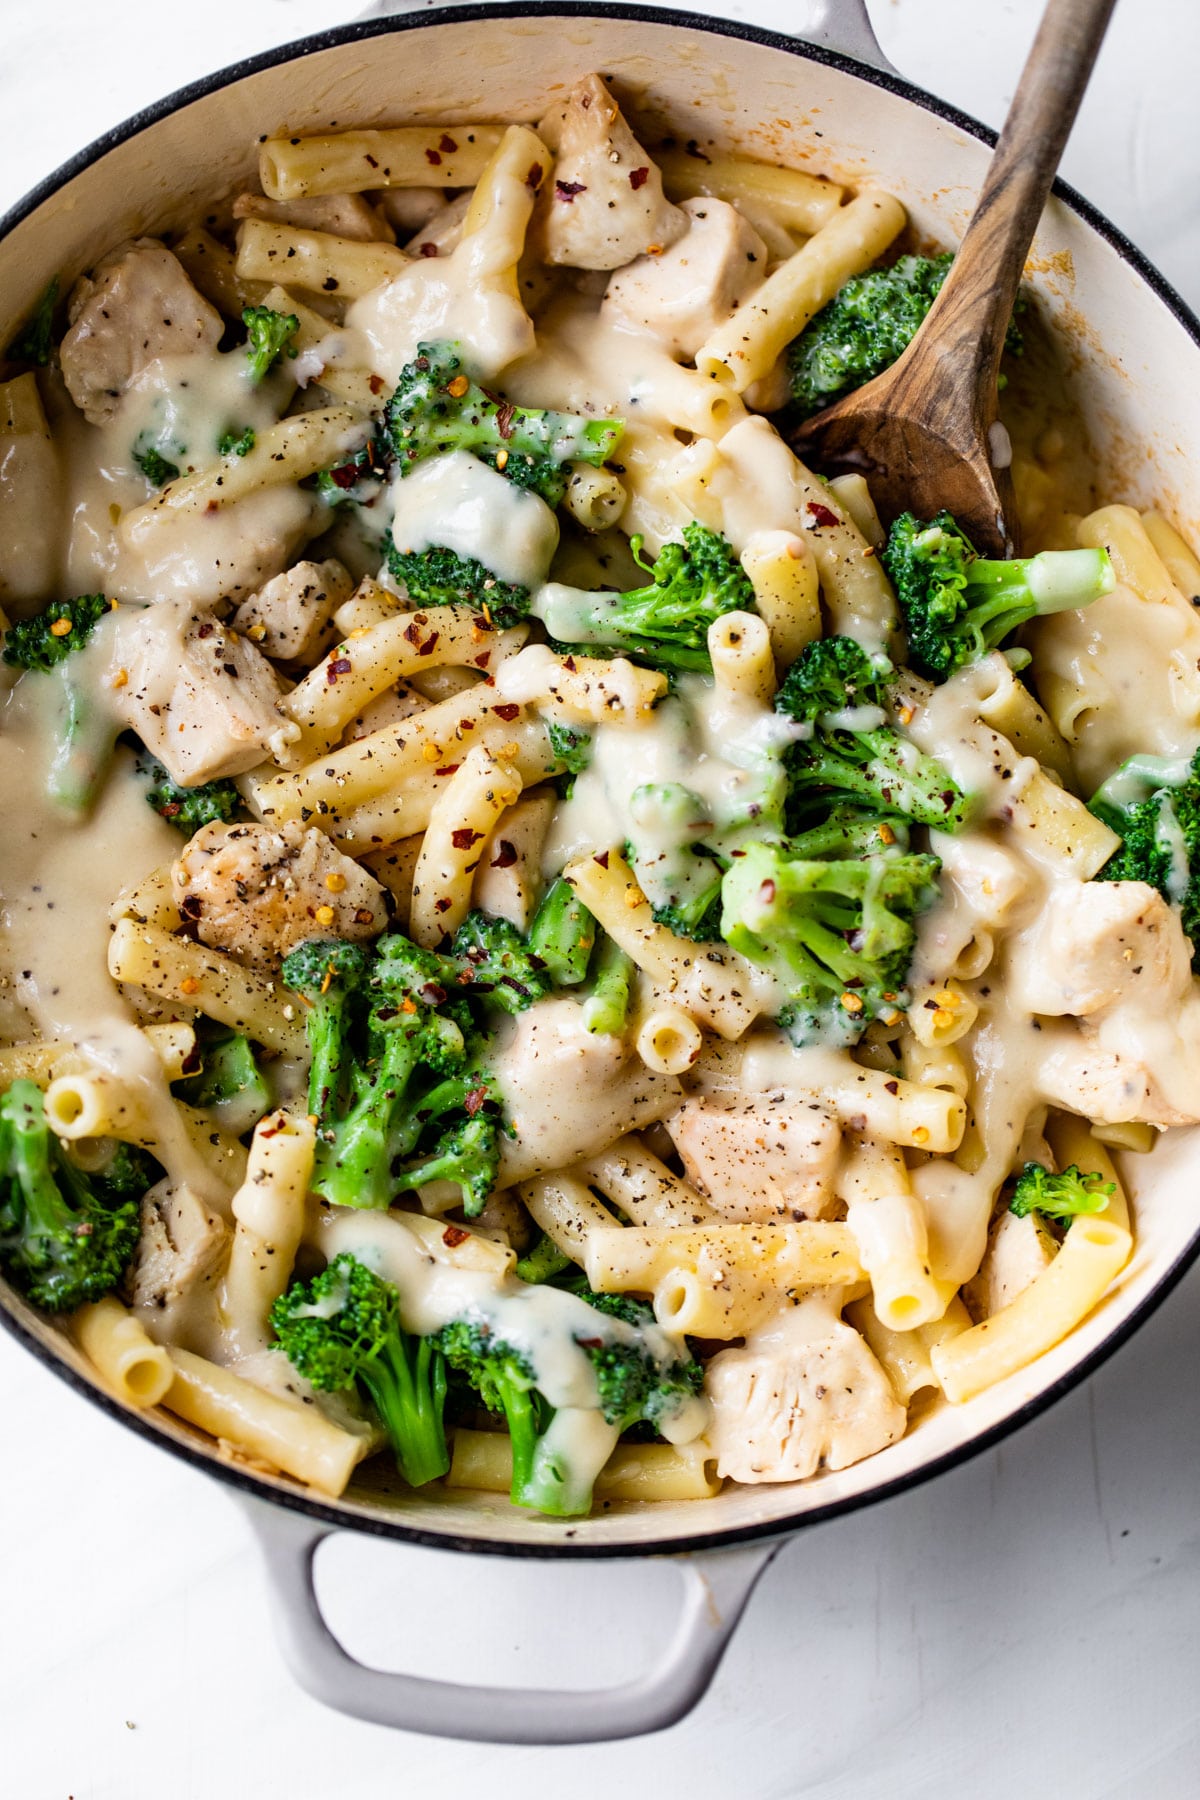 skillet filled with ziti pasta, chicken, broccoli, and alfredo sauce